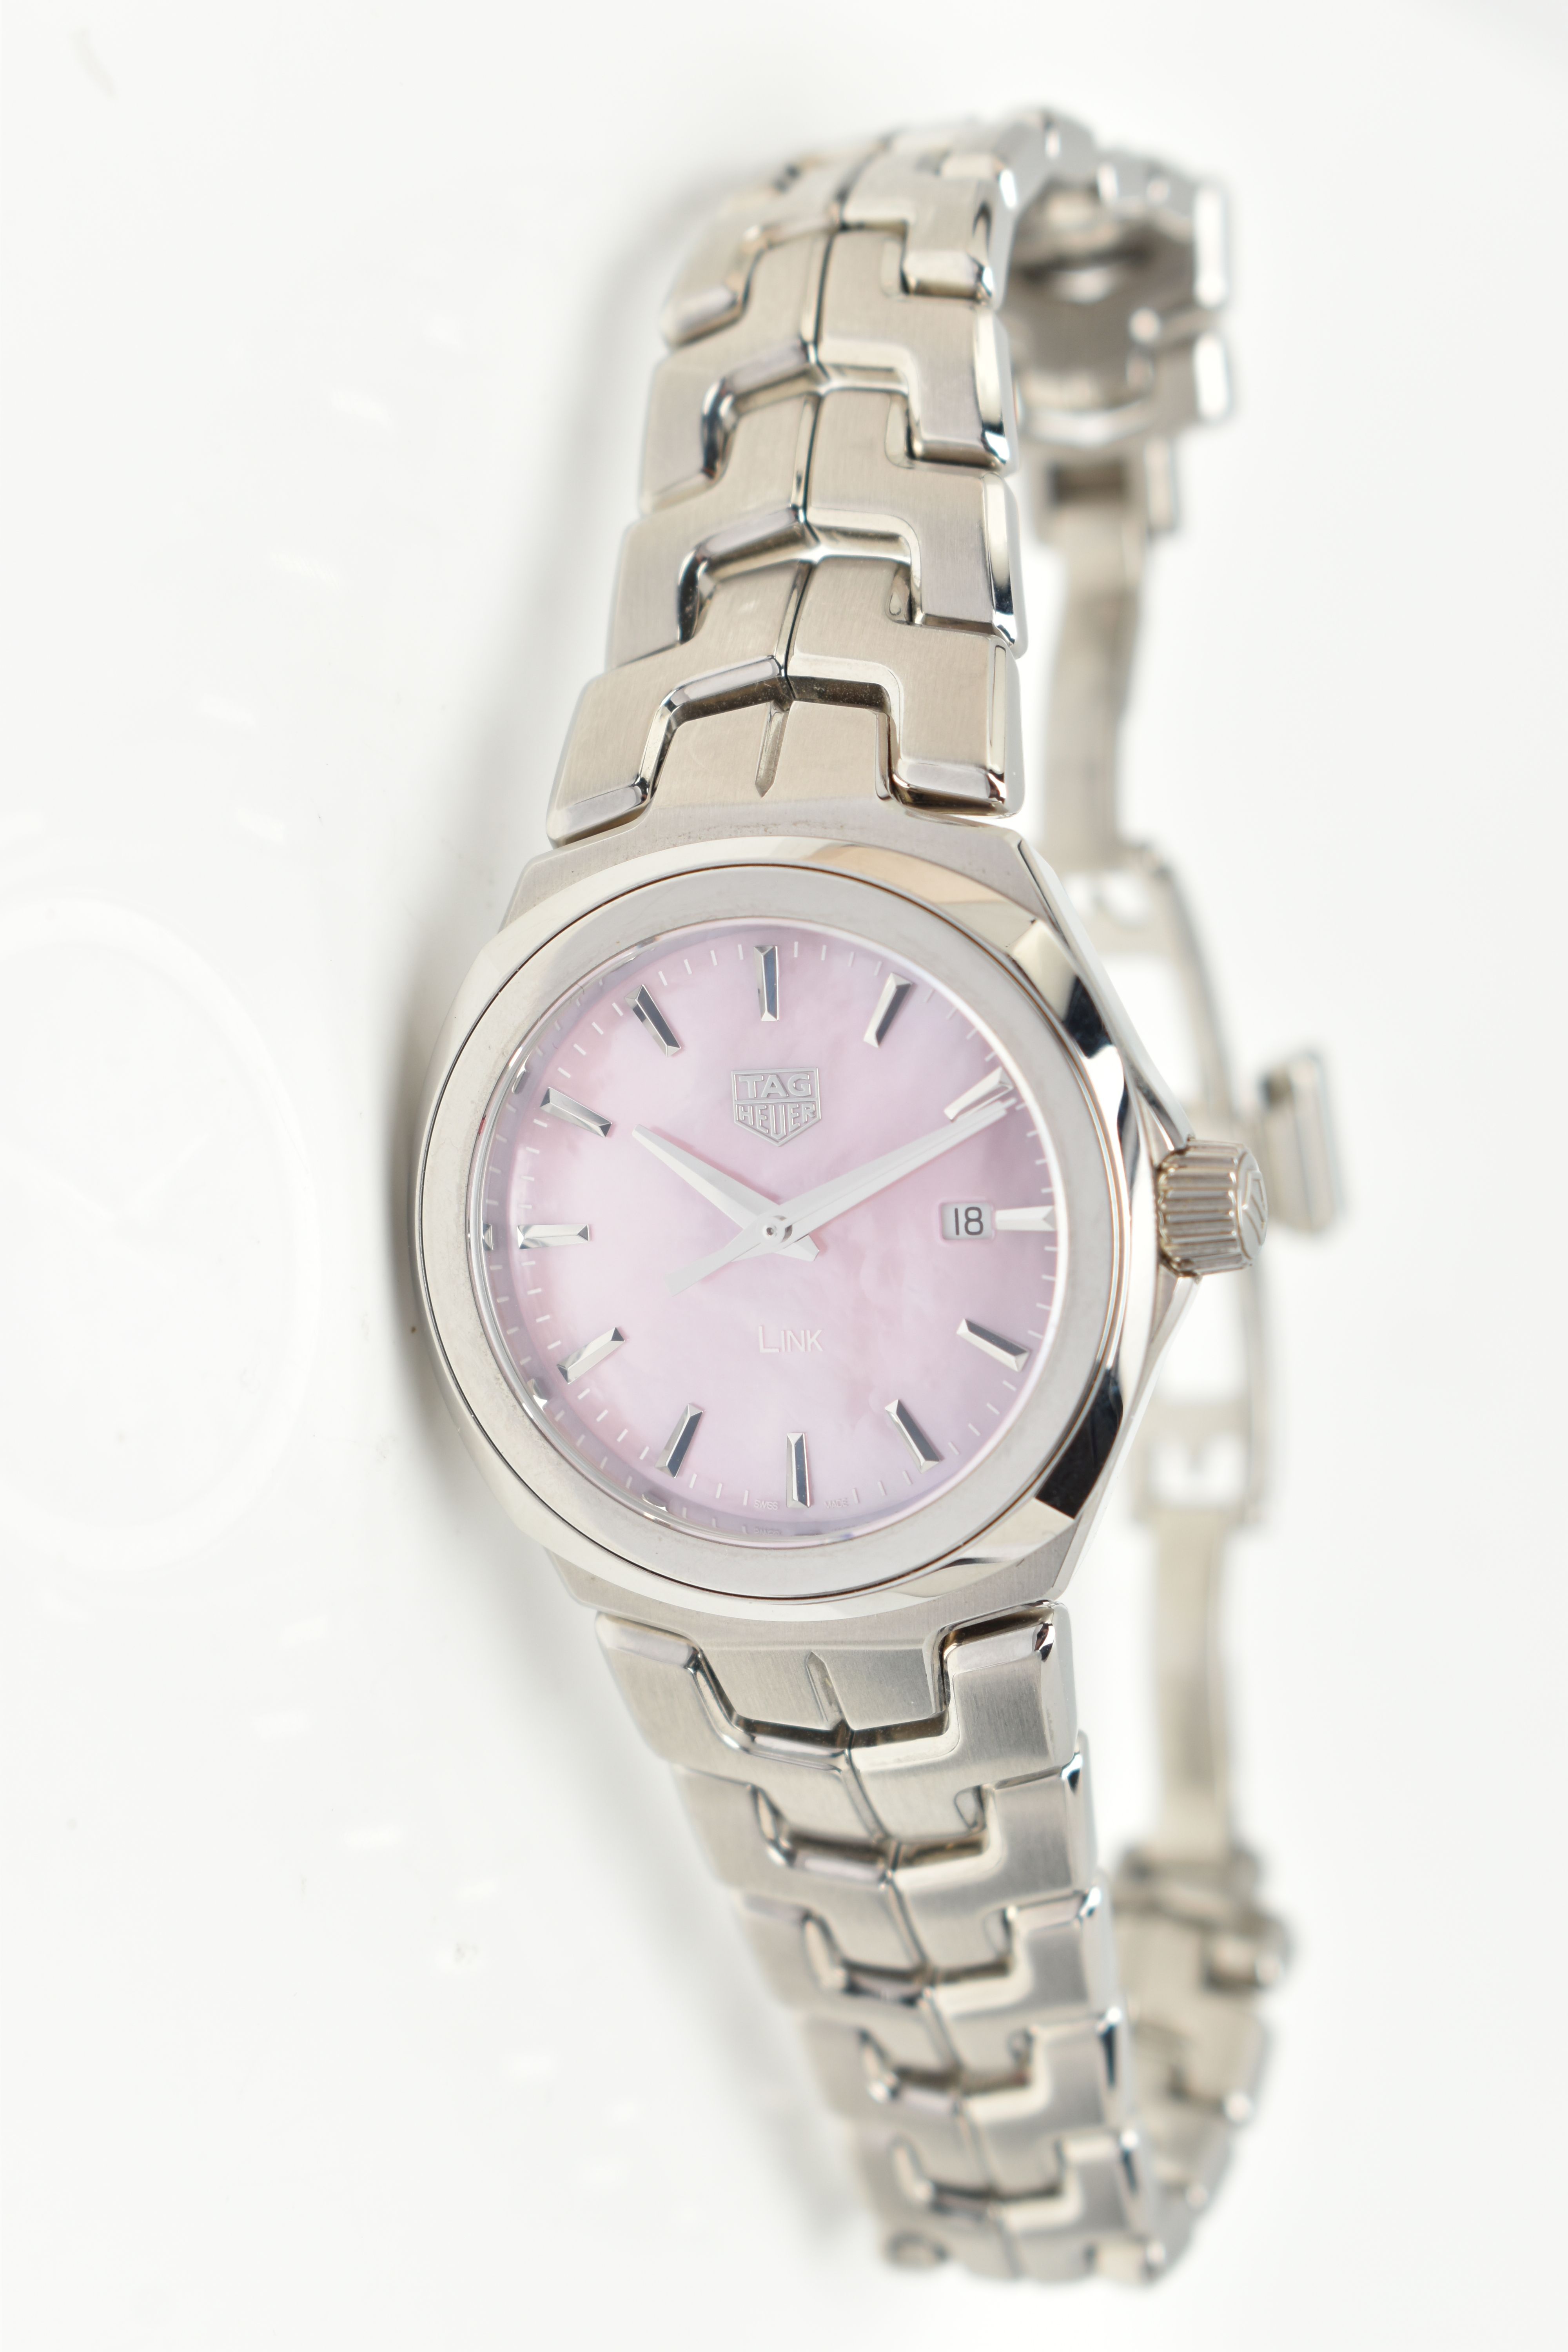 A 'TAG HEUER' LINK LADIES WRISTWATCH, quartz movement, pink dial signed 'Tag Heuer Link', baton - Image 4 of 10